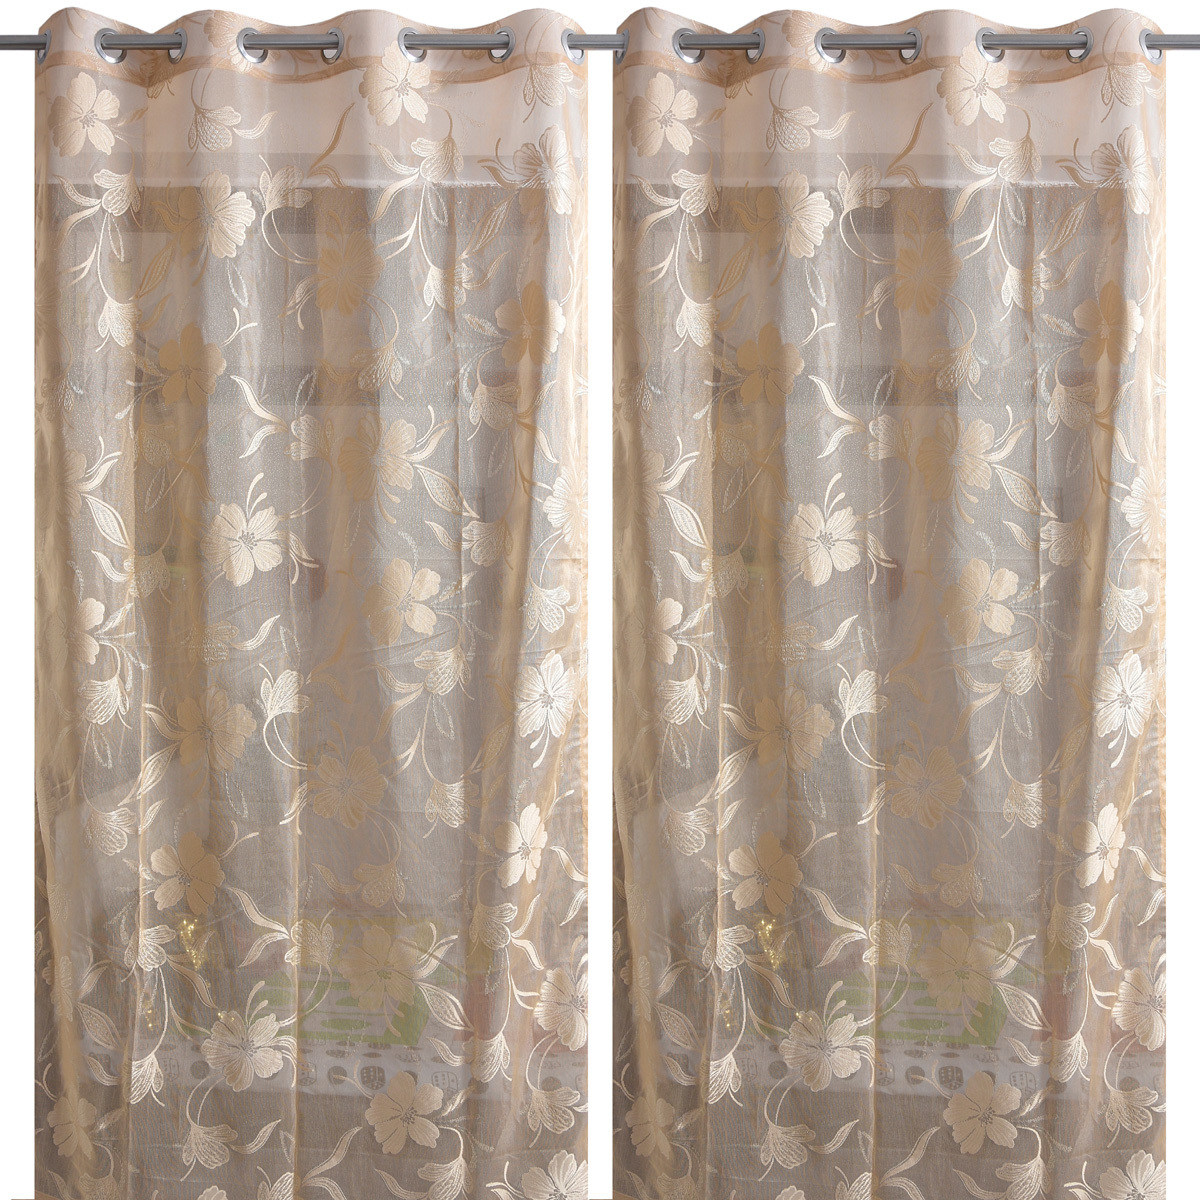 HANDTEX HOME Sheer Brown Net Curtains With Beautiful Embroidered Floral Designs for Door 4ft x 7ft Set of 2 SP02